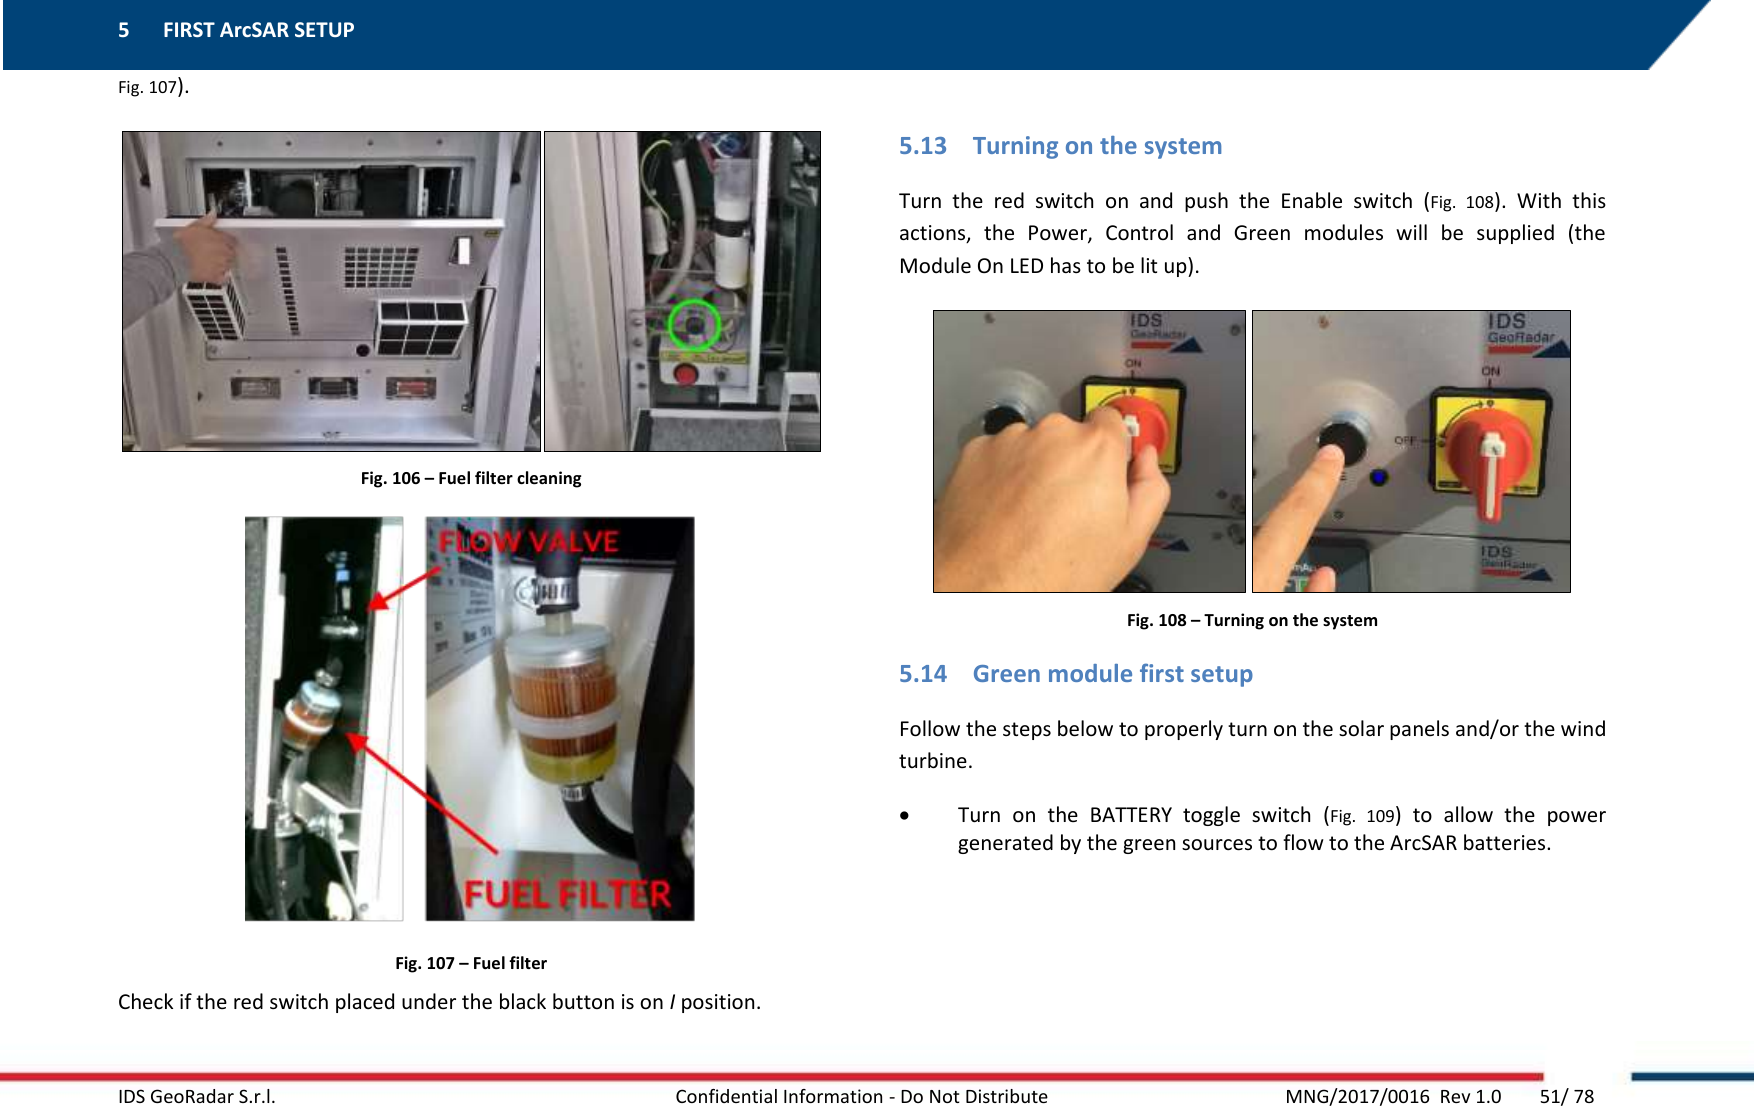 5 FIRST ArcSAR SETUP    IDS GeoRadar S.r.l.  Confidential Information - Do Not Distribute     MNG/2017/0016  Rev 1.0        51/ 78 Fig. 107).  Fig. 106 – Fuel filter cleaning  Fig. 107 – Fuel filter Check if the red switch placed under the black button is on I position.  5.13 Turning on the system Turn  the  red  switch  on  and  push  the  Enable  switch  (Fig.  108).  With  this actions,  the  Power,  Control  and  Green  modules  will  be  supplied  (the Module On LED has to be lit up).  Fig. 108 – Turning on the system 5.14 Green module first setup Follow the steps below to properly turn on the solar panels and/or the wind turbine.  Turn  on  the  BATTERY  toggle  switch  (Fig.  109)  to  allow  the  power generated by the green sources to flow to the ArcSAR batteries. 